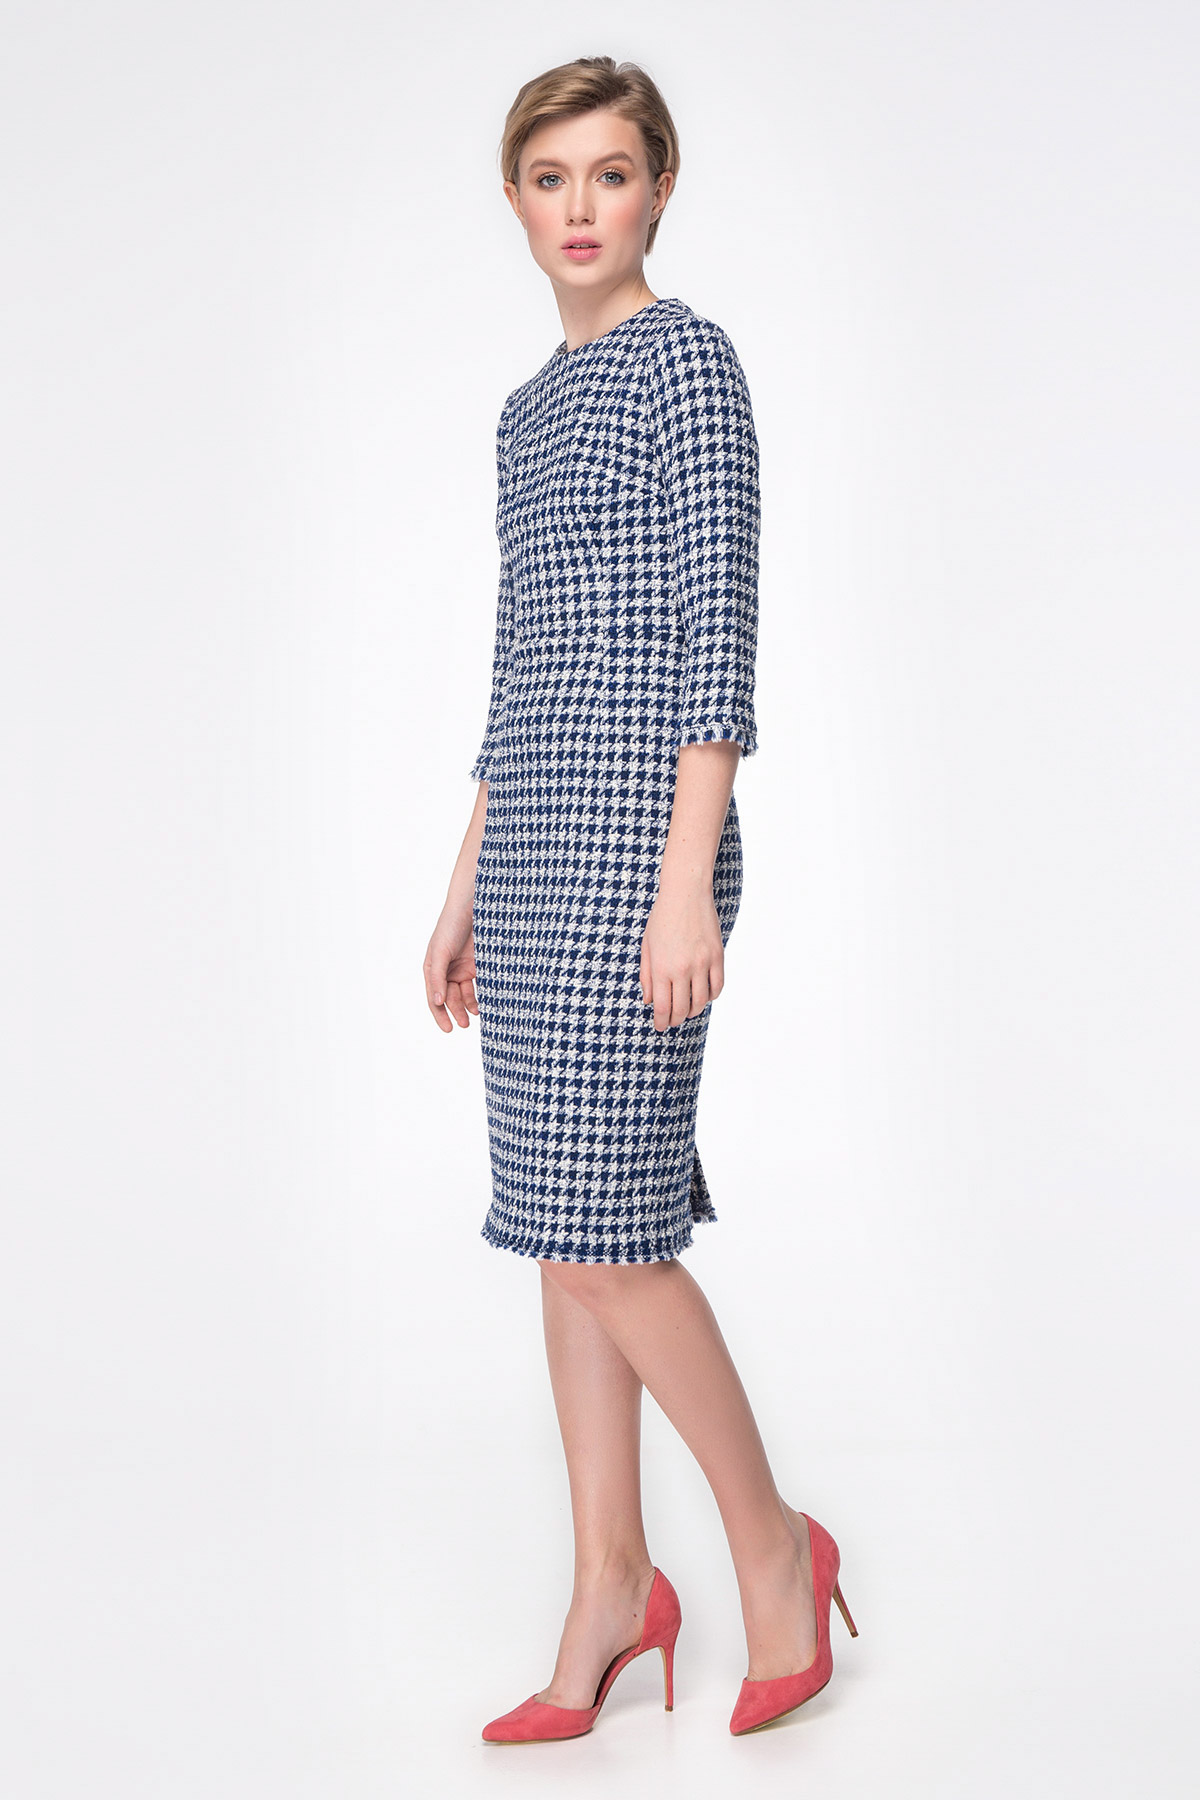 Column dress with blue&white houndstooth print, photo 10